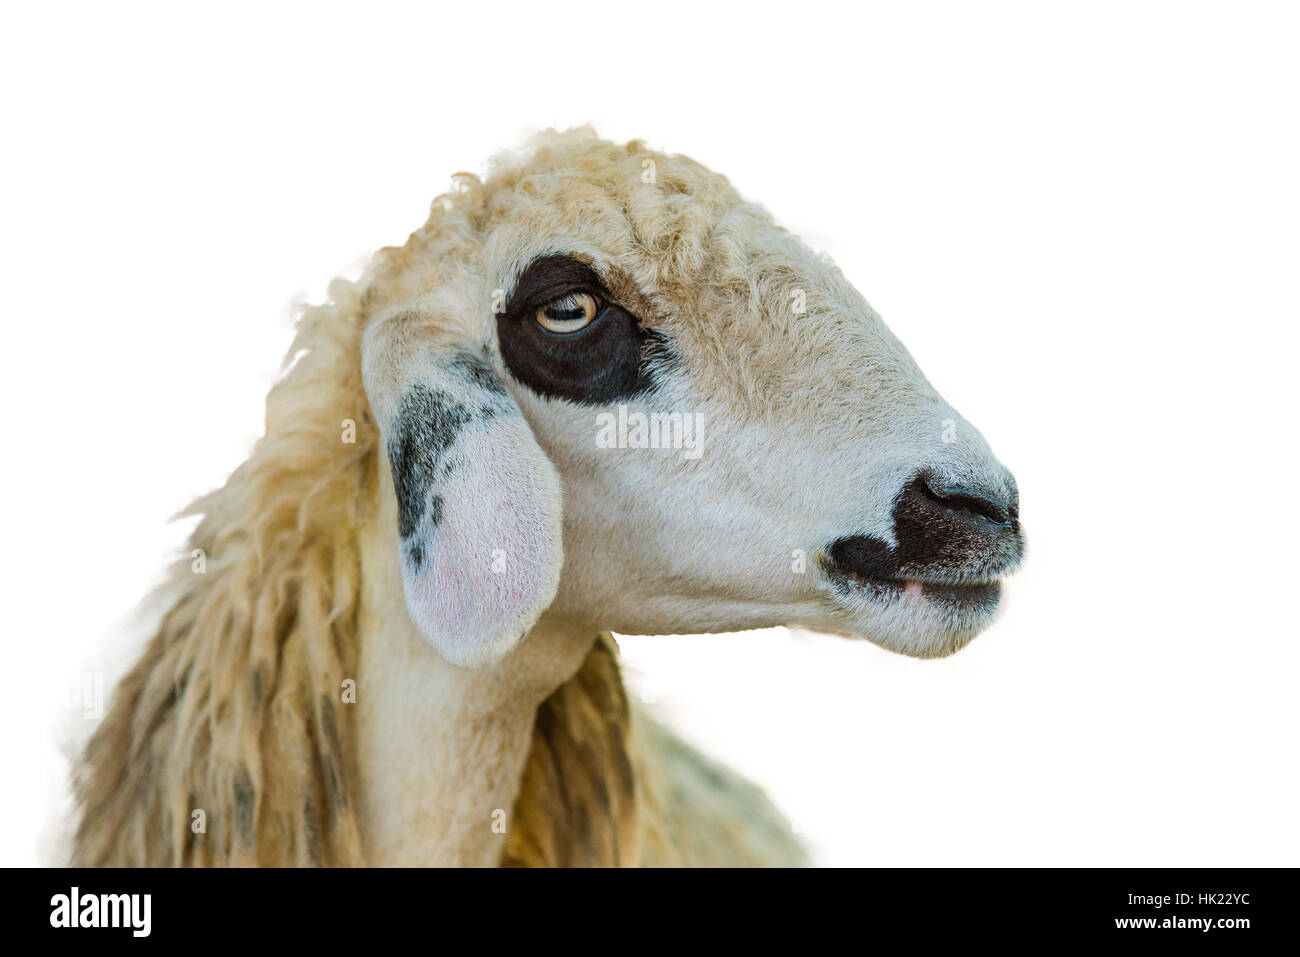 Brillen Schaf Sheep Face Isolation On White Background With Clipping Path Stock Photo